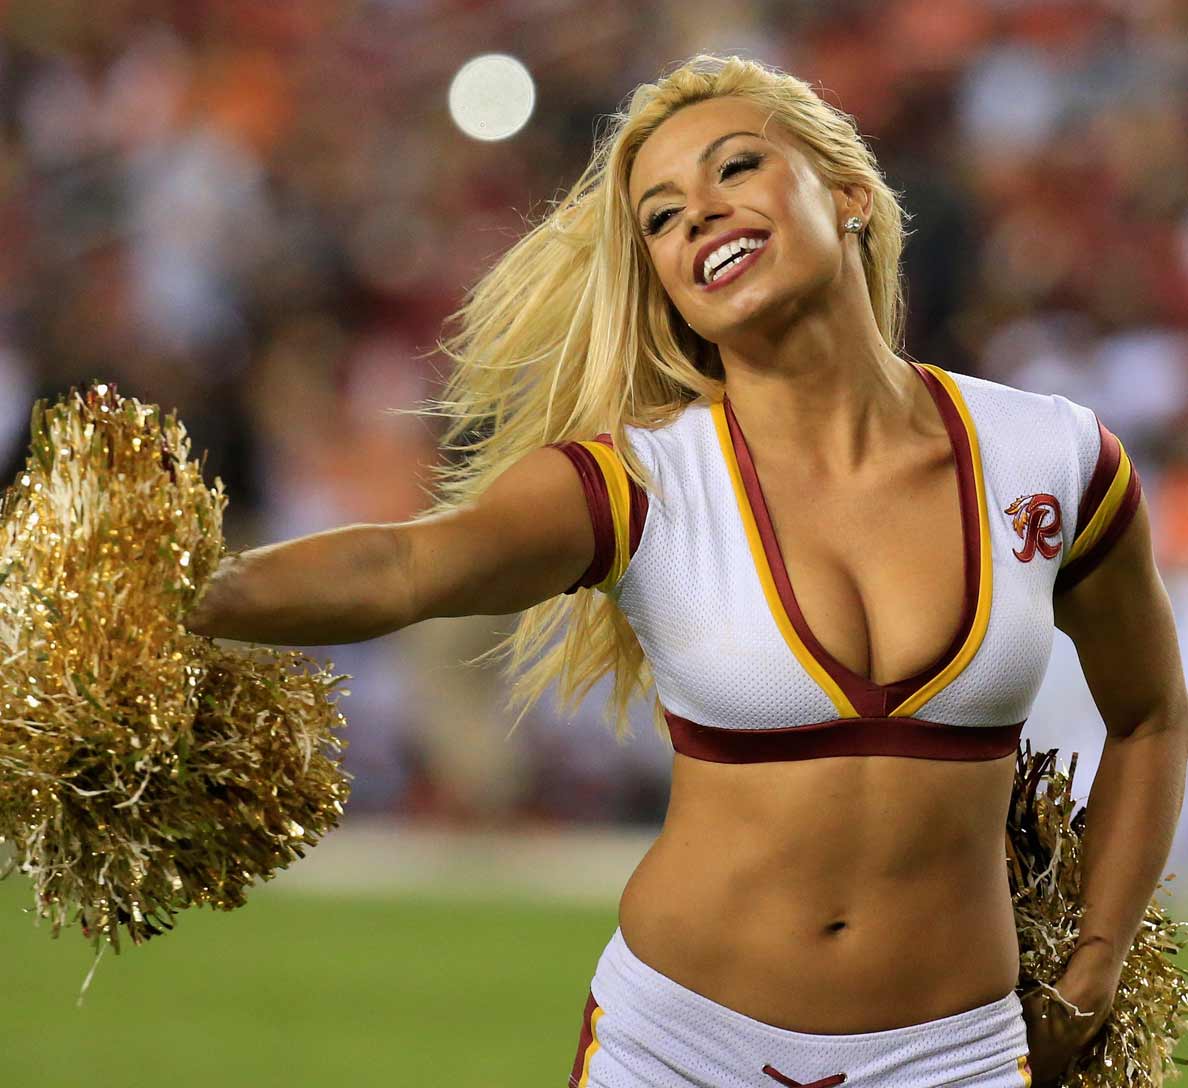 The 10 Hottest Cheerleaders In The Nfl Muscle Fitness.